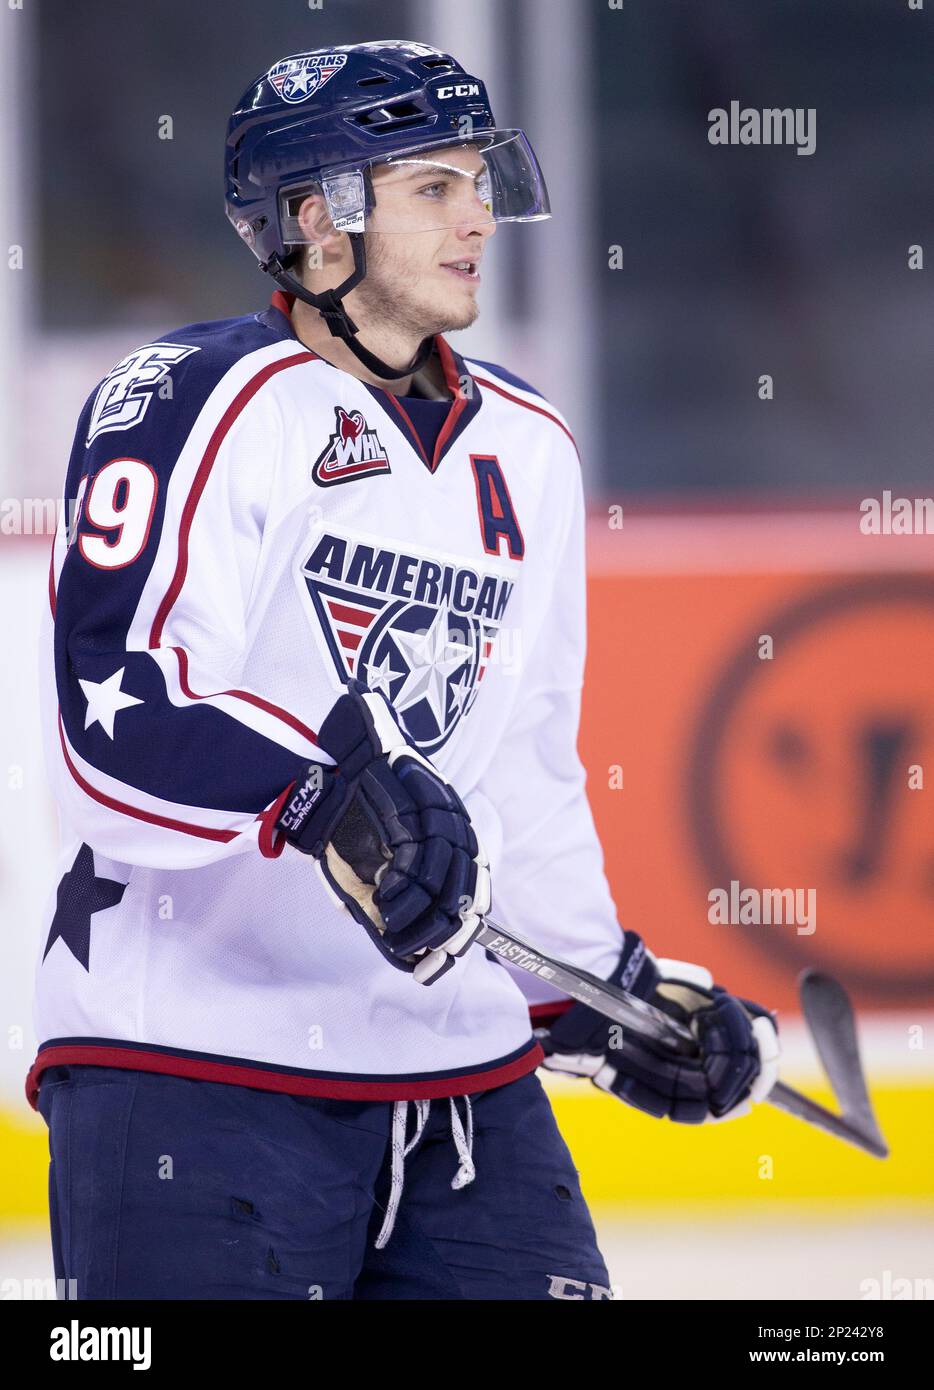 WHL (Western Hockey League) player profile photo on Tri-City Americans Parker Bowles during a WHL hockey game against the Calgary Hitmen in Calgary, Alberta on Nov